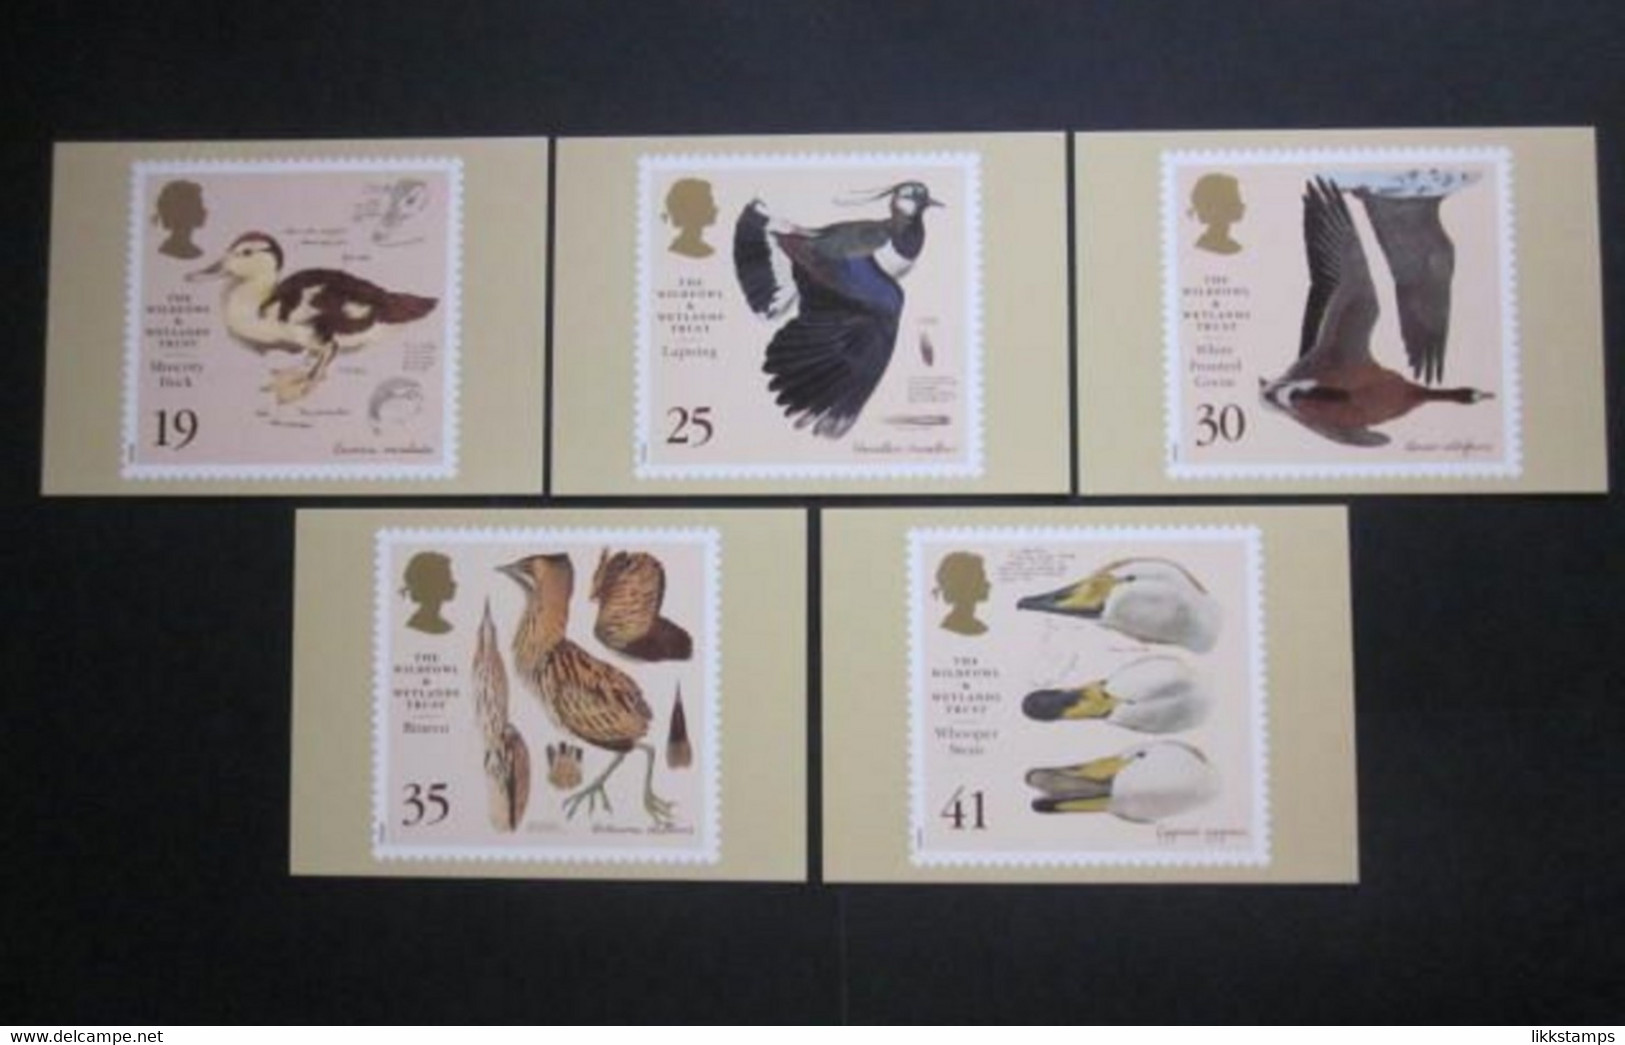 1996 THE 50th ANNIVERSARY OF THE WILDFOWL AND WETLANDS TRUST P.H.Q. CARDS UNUSED, ISSUE No. 177 (B) #01098 - Cartes PHQ